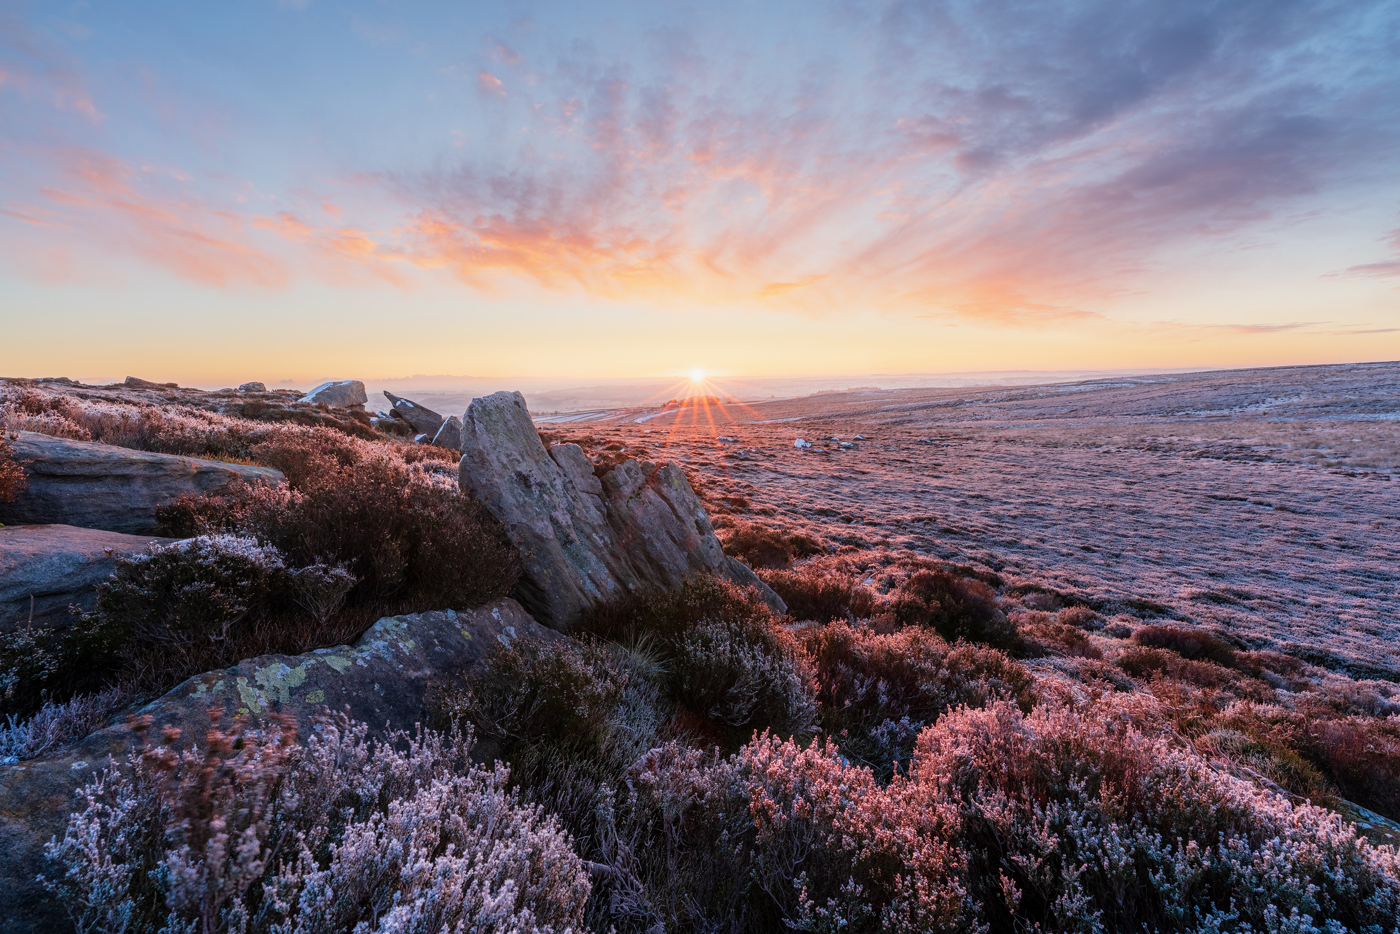 A vivid sunrise graces a frost-covered moorland with pink heather and rocks. A sunburst peeks above the horizon, casting a warm glow on the scene and painting the sky with hues of orange, pink, and blue. Frost glistens on the heath and rocks, suggesting a cold morning.